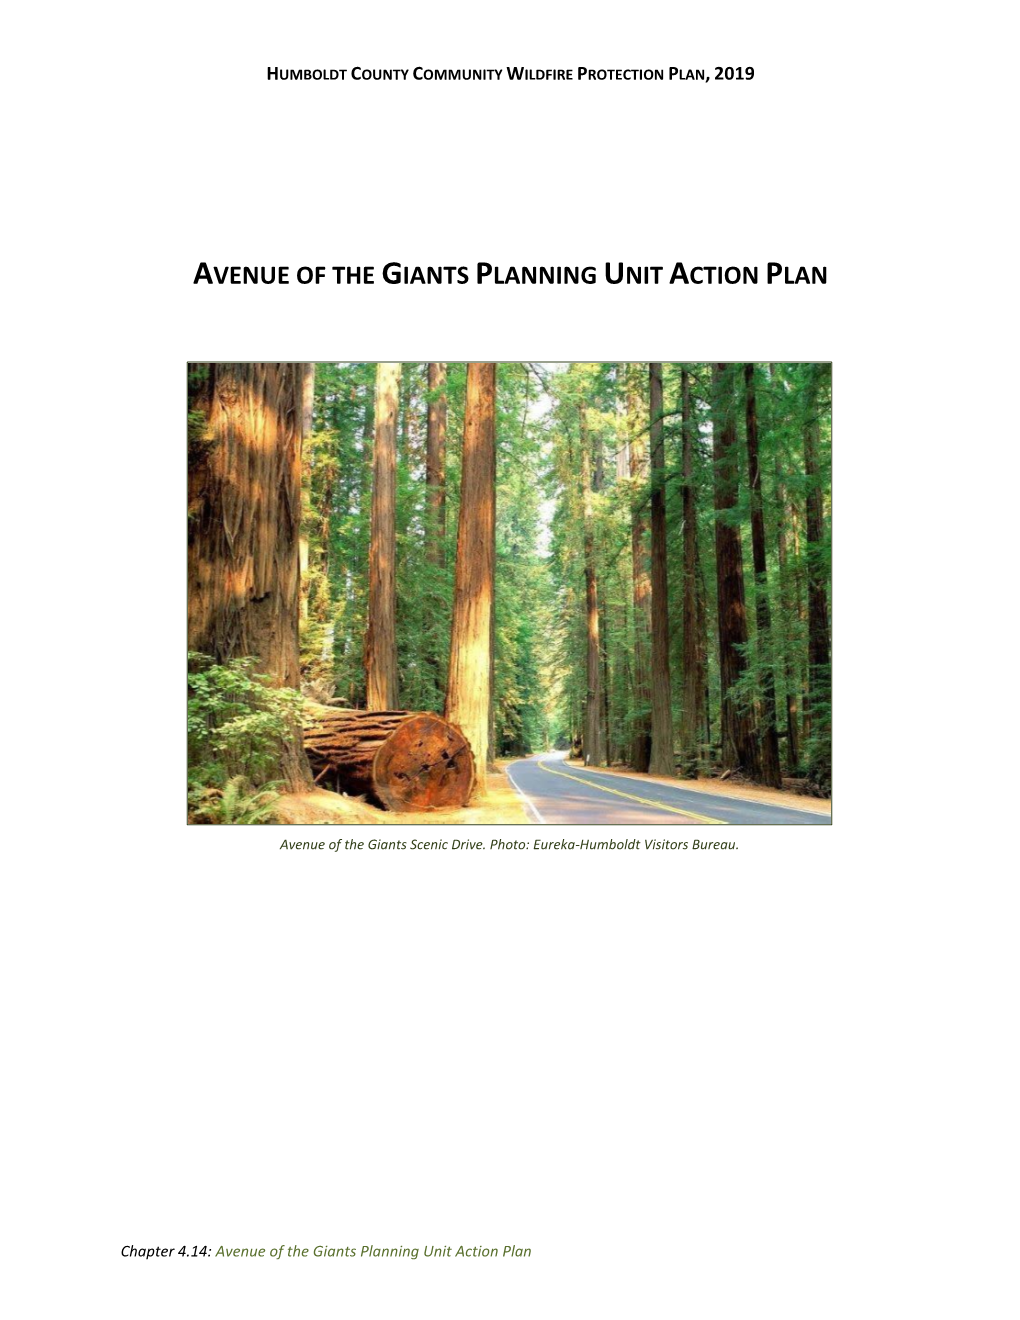 4.14 Avenue of the Giants Planning Unit Action Plan, Humboldt County CWPP Final